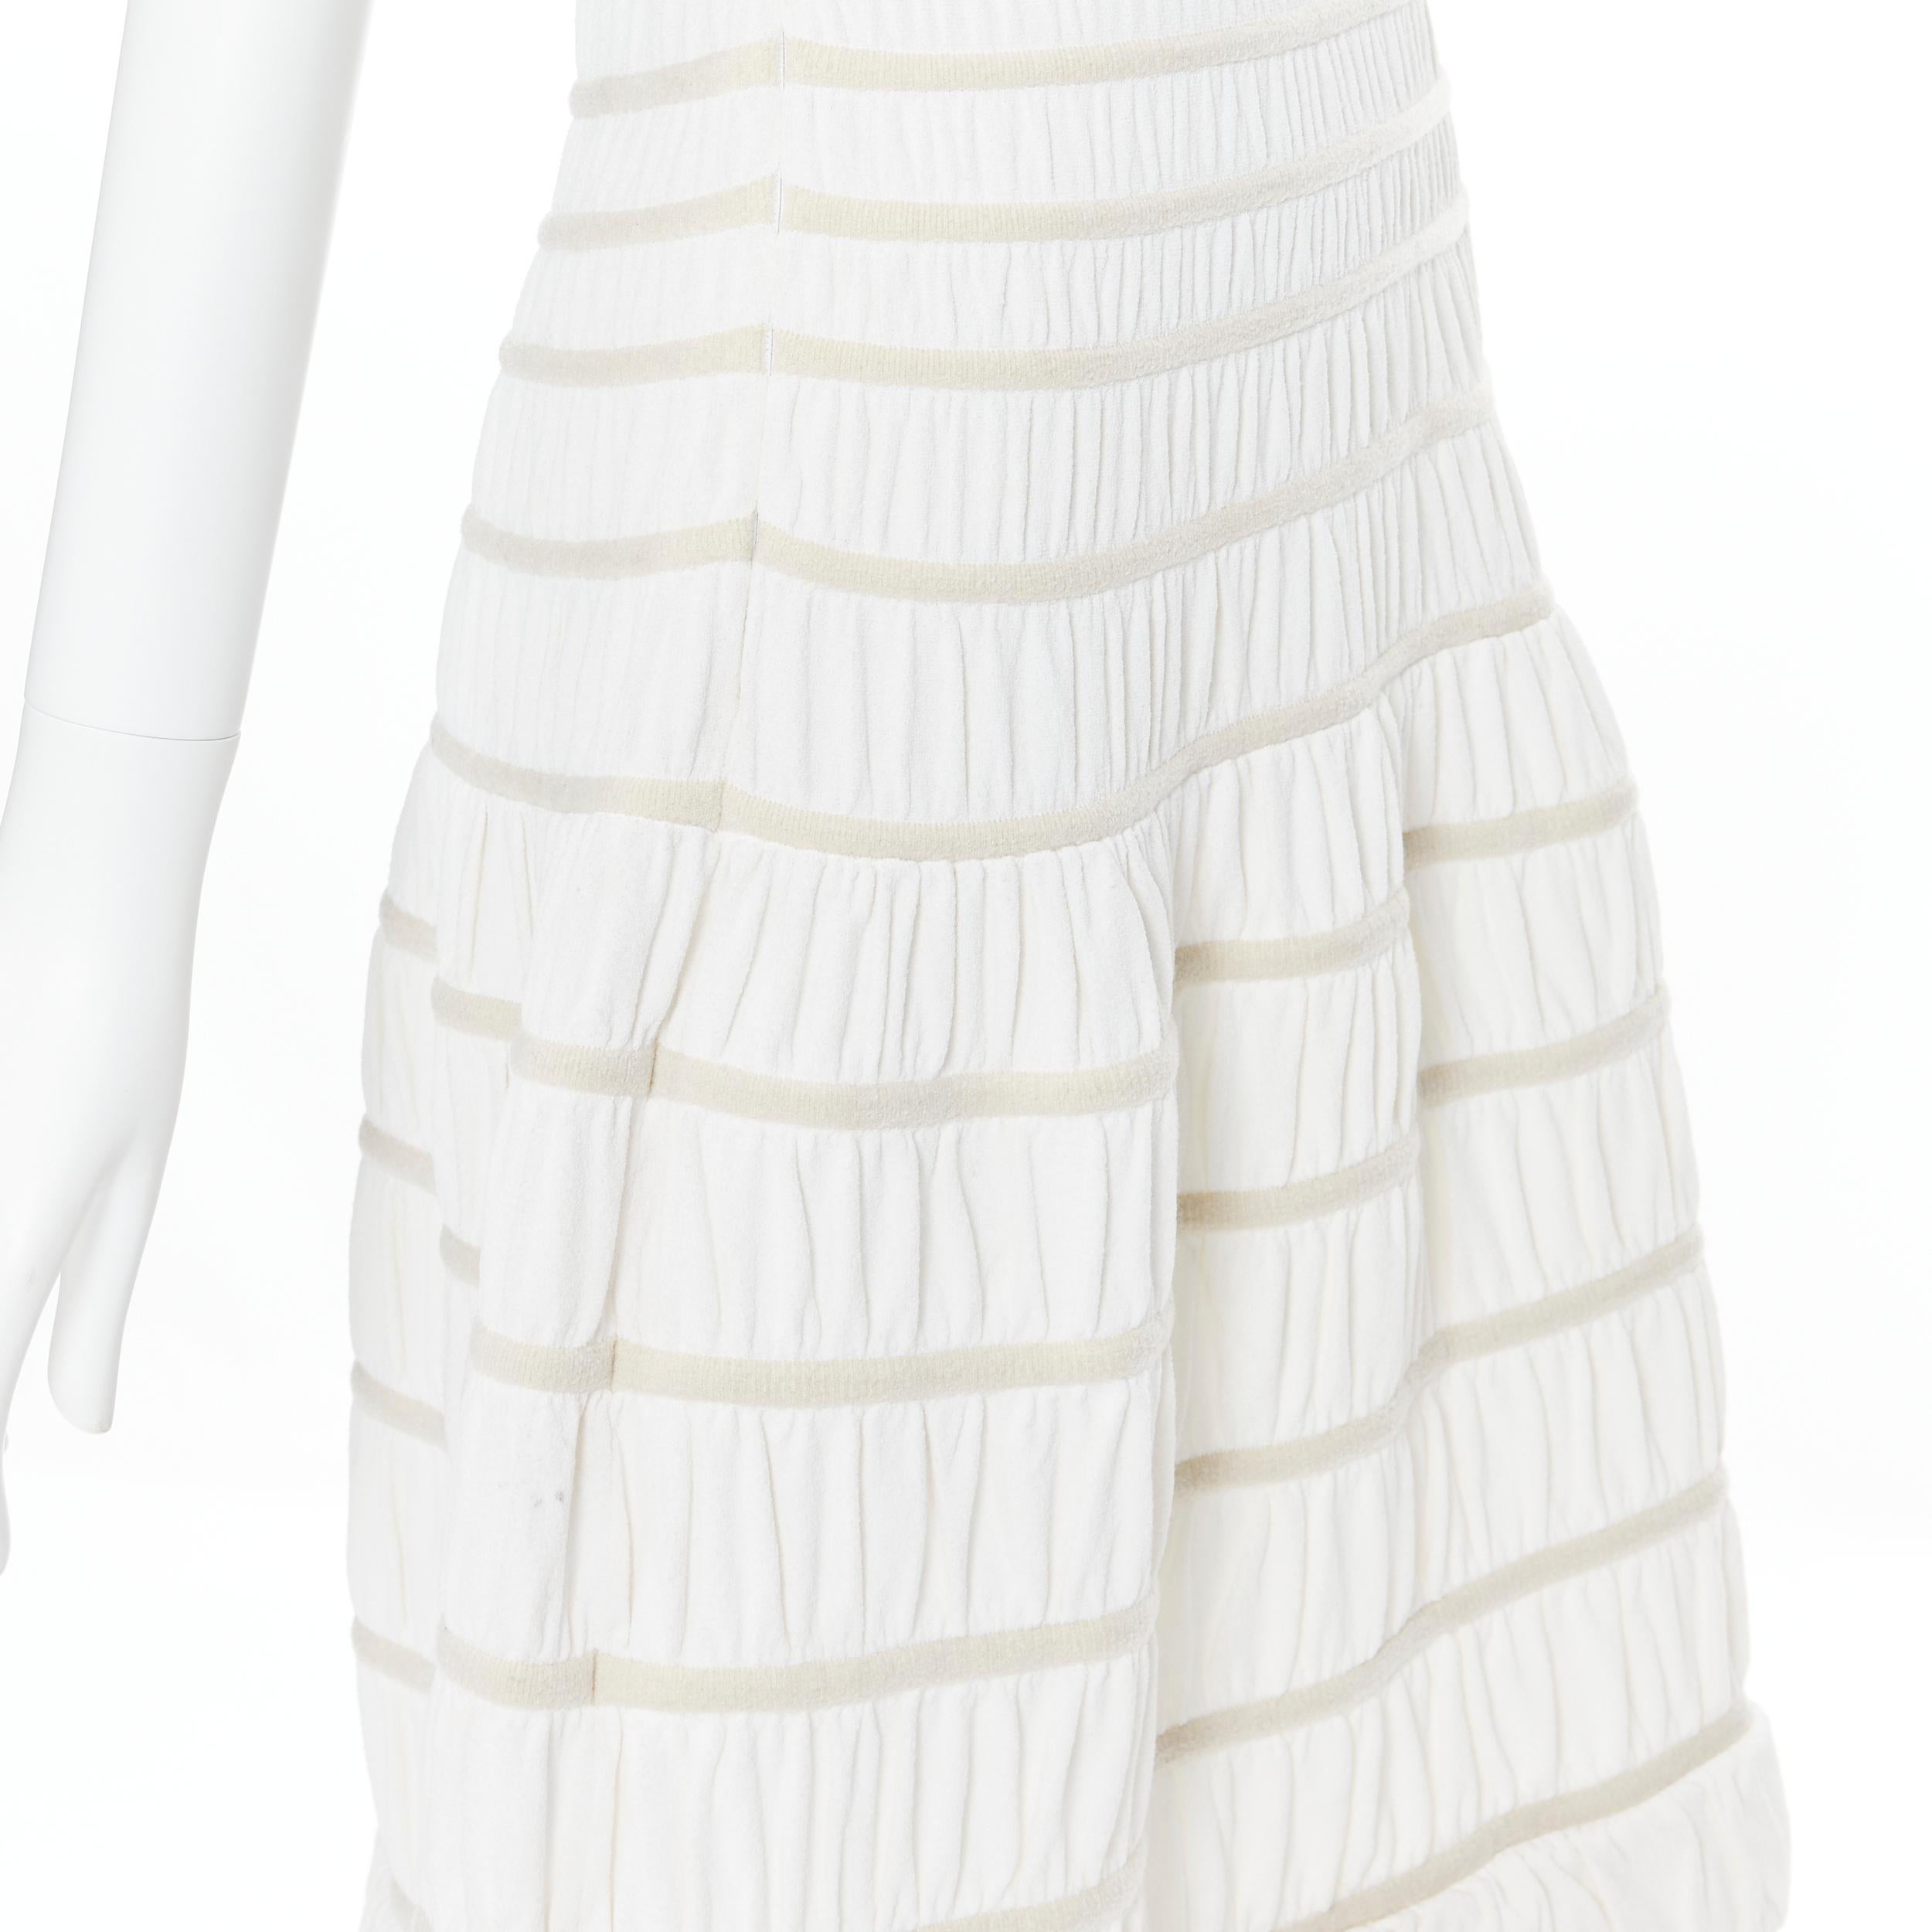 ALAIA white viscose beige ribbed cloque fit flare cocktail dress S 
Reference: AEMA/A00033 
Brand: Alaia 
Designer: Azzedine Alaia 
Material: Viscose 
Color: White 
Pattern: Solid 
Extra Detail: Boat neck. Fluffy ribbed trimming. Cloque fabrication.